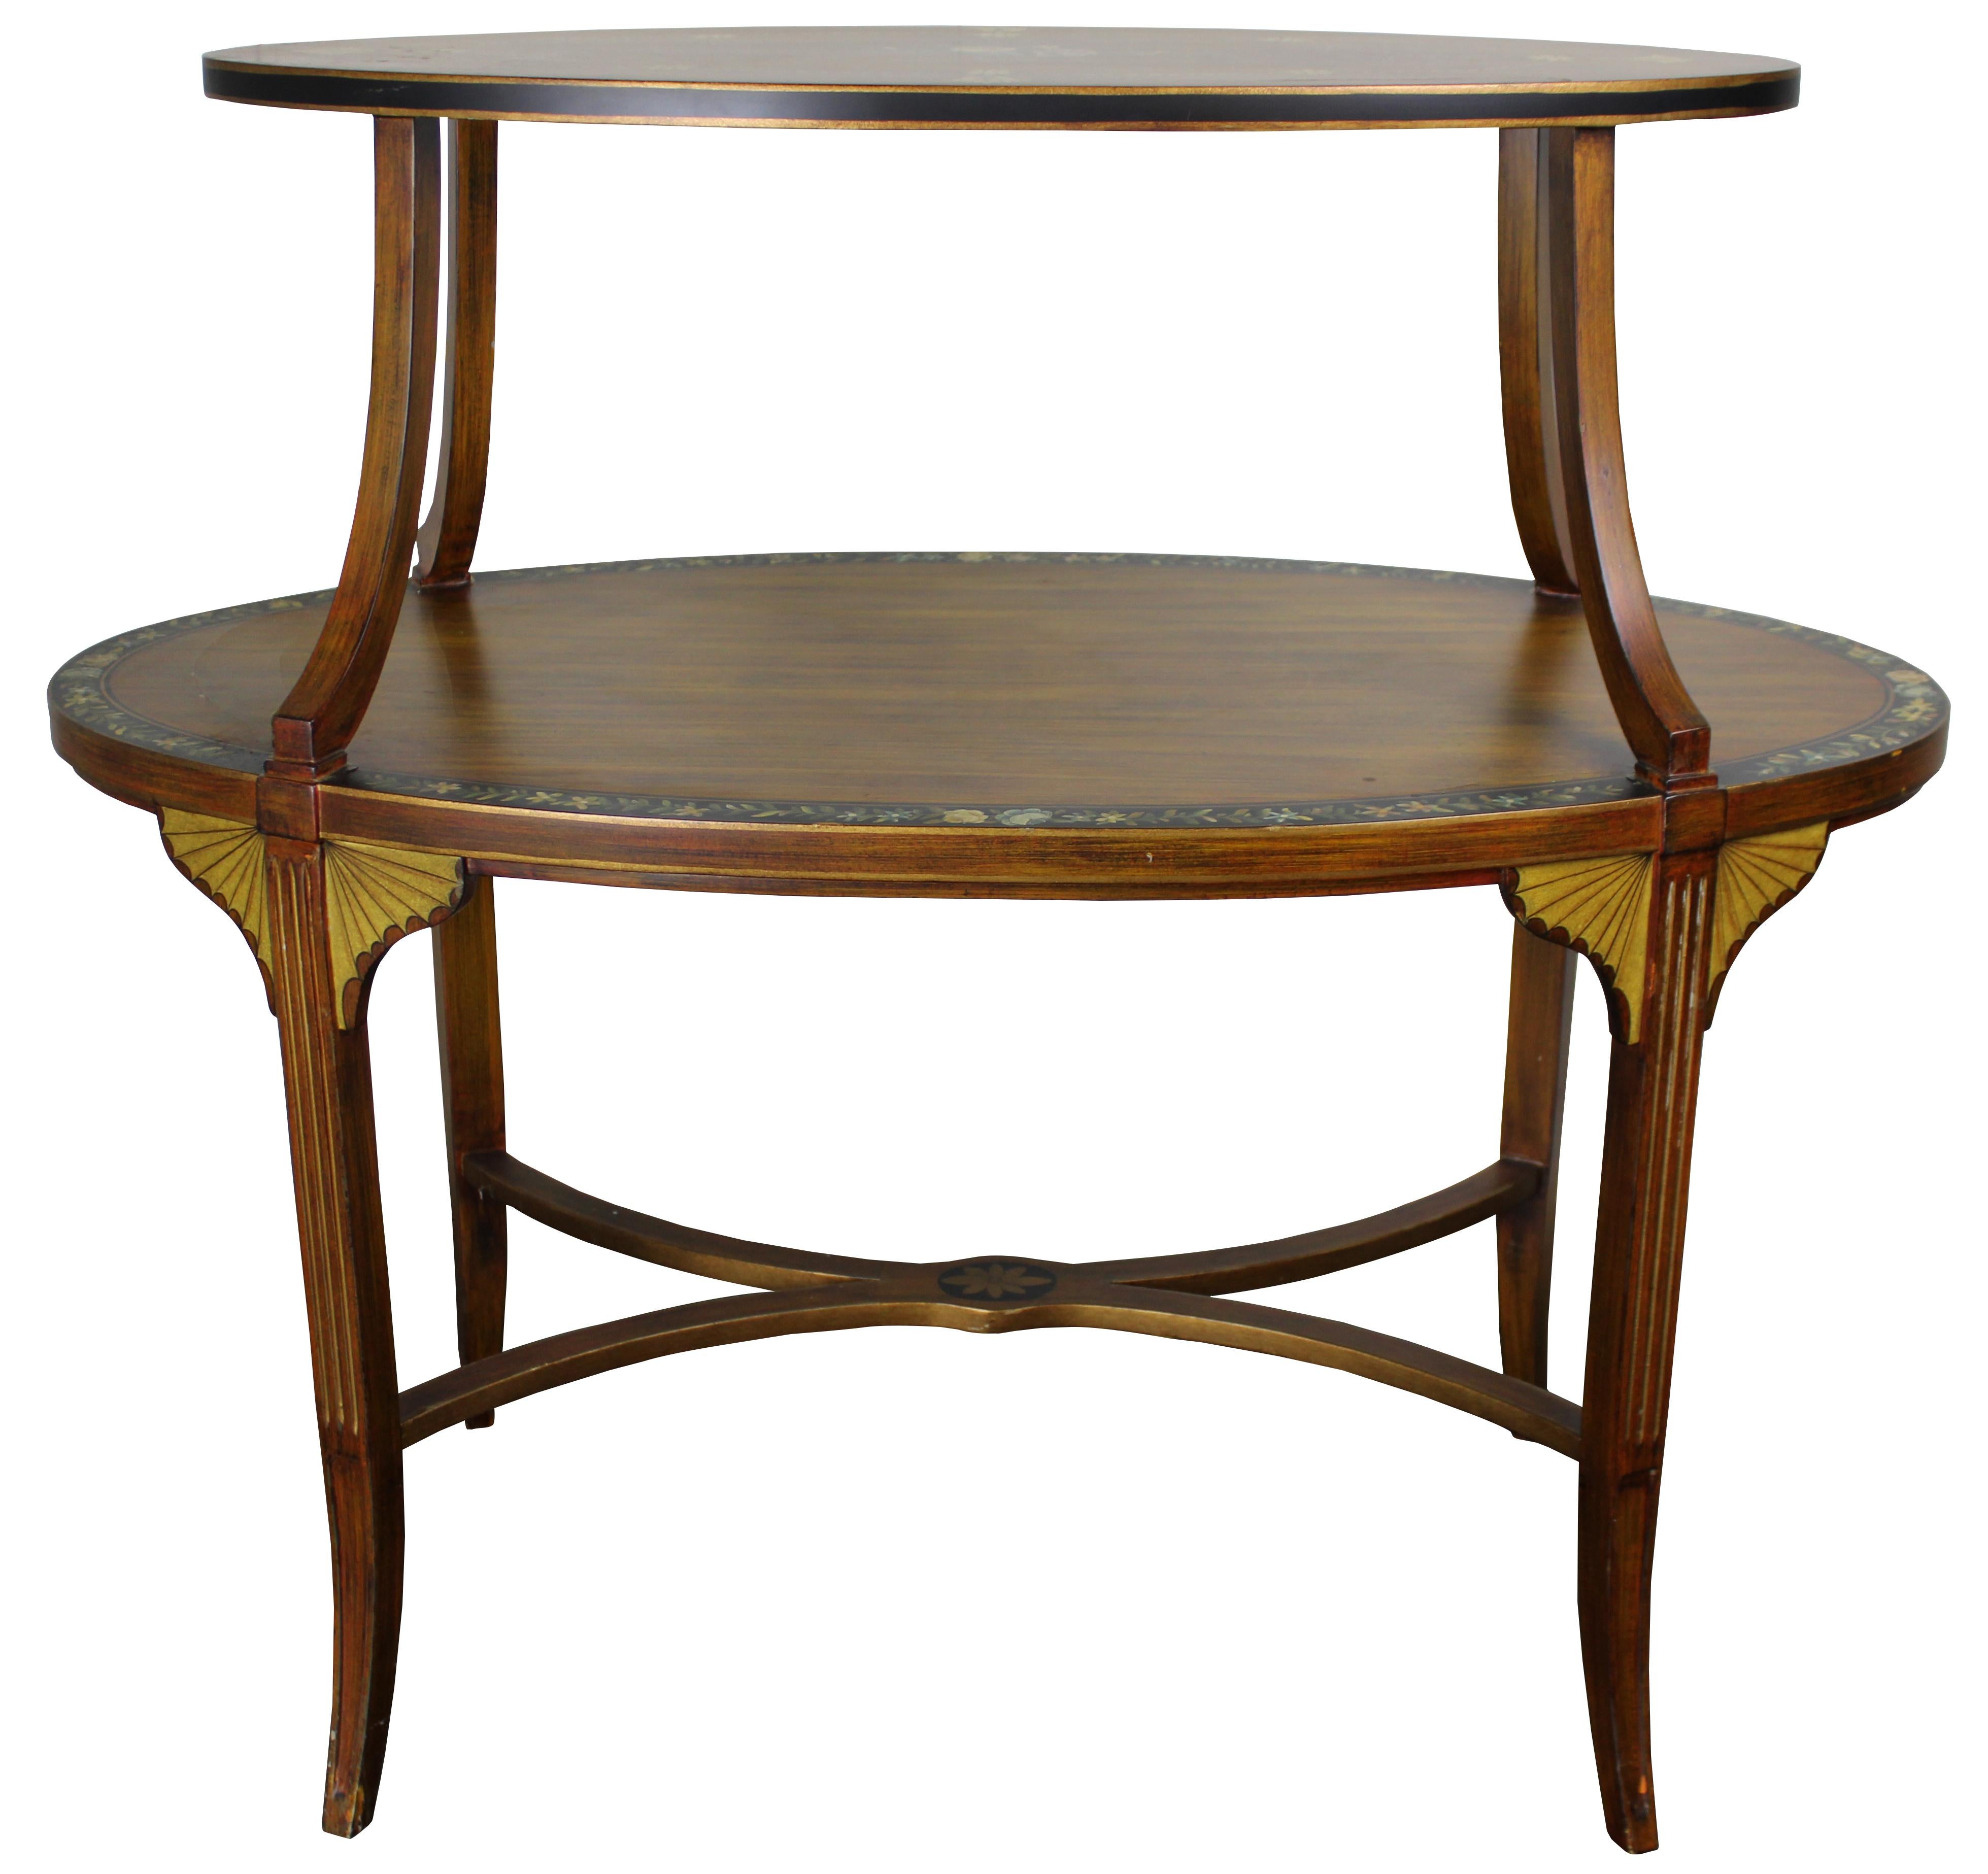 Late 20th century Edwardian inspired tray top étagère by Sarreid Ltd. Features oval surfaces with a painted grain, black trim and floral painted detail. Incudes a neoclassical inspired X-stretcher, fluted legs and winged trim in the style of